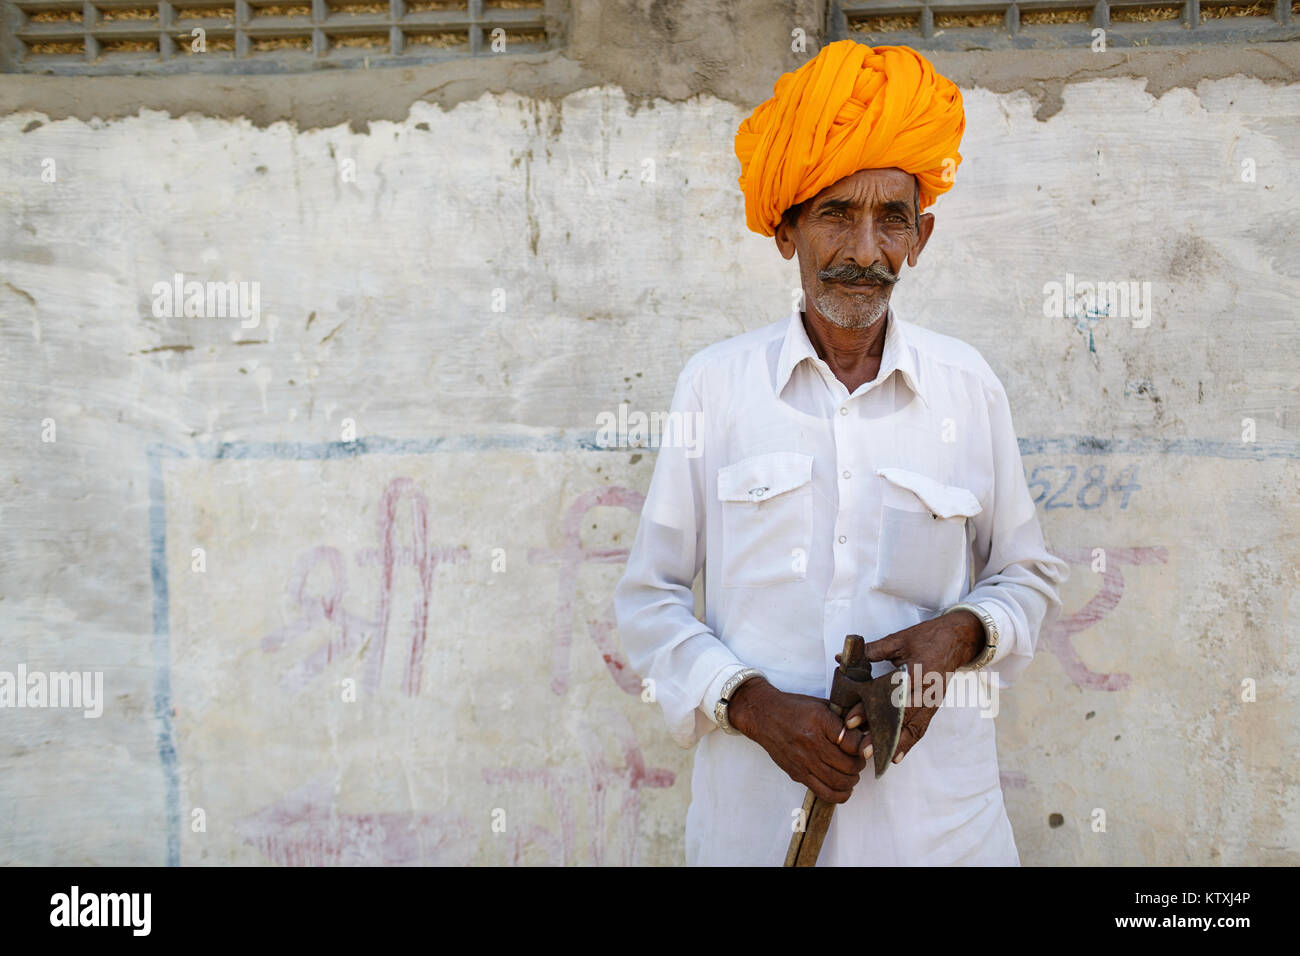 Old indian man in white outfit wearing orange turban, standing in front of white wall in a village near Pushkar, Rajasthan, India. Stock Photo